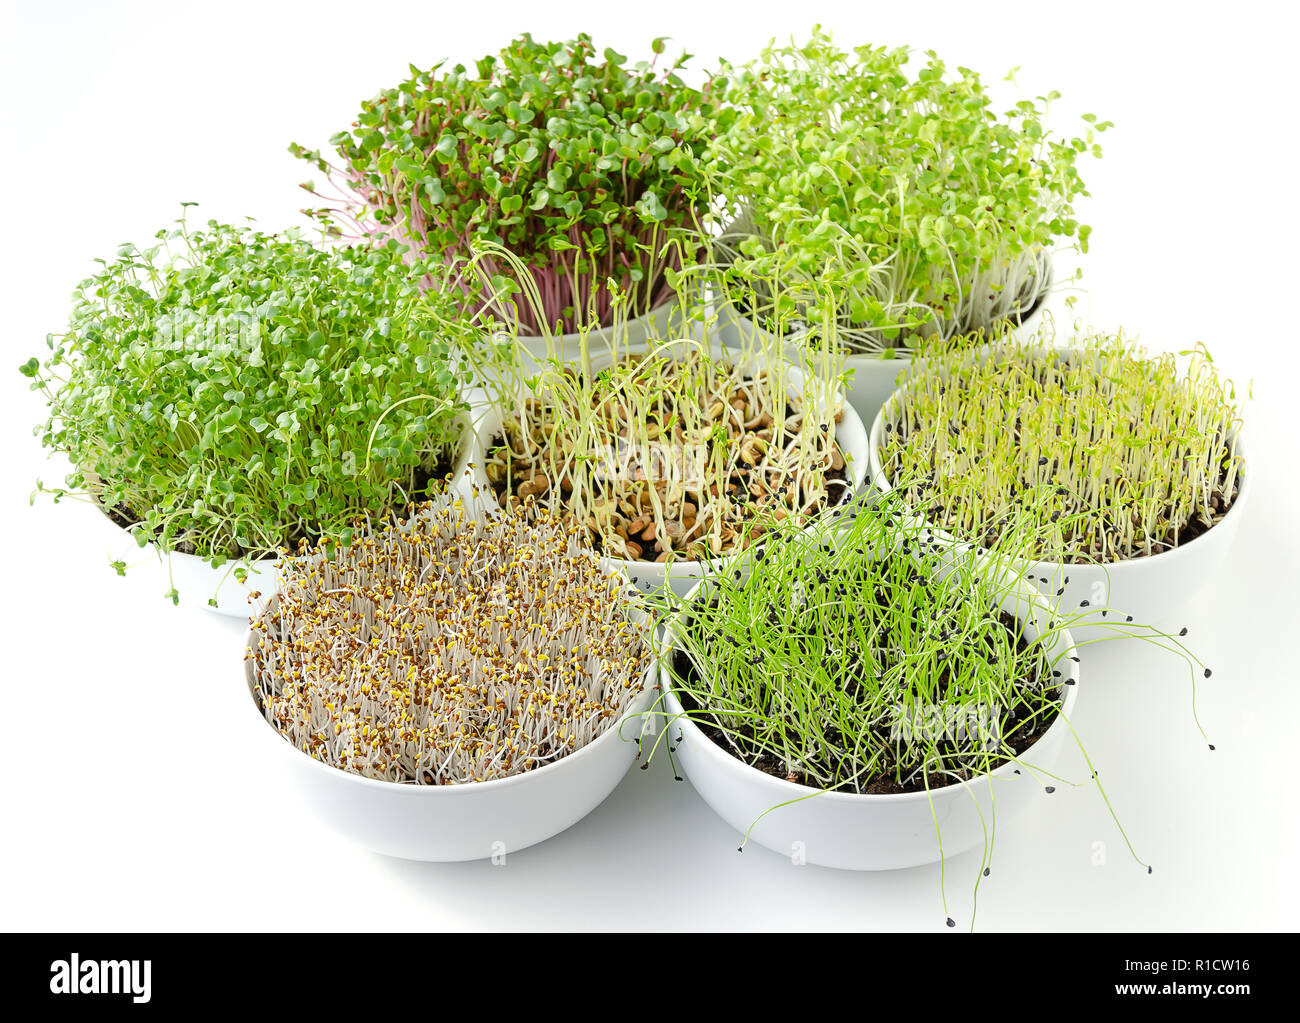 Sprouts in white bowls. Seven sprouting microgreens. Shoots of alfalfa, Chinese cabbage, garlic, kale, lentils and radish in potting compost. Stock Photo